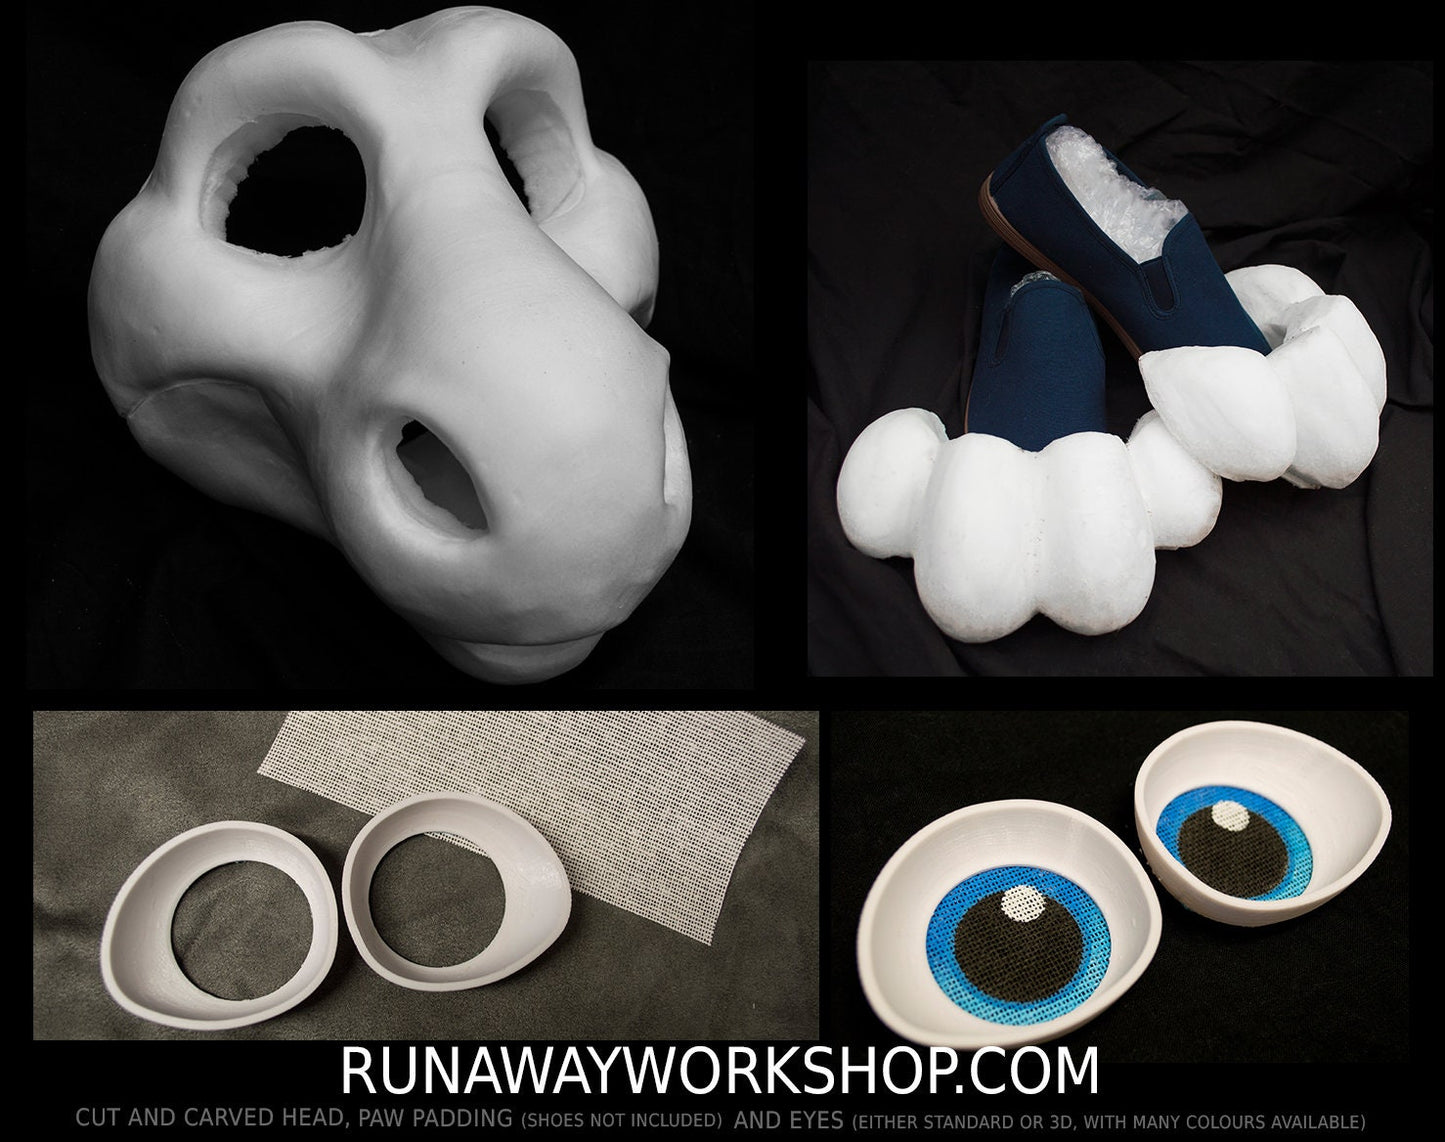 Angel dragon bundle deal: cut and carved head base, Eyes and Feet padding, for costumes mascots and fursuits.